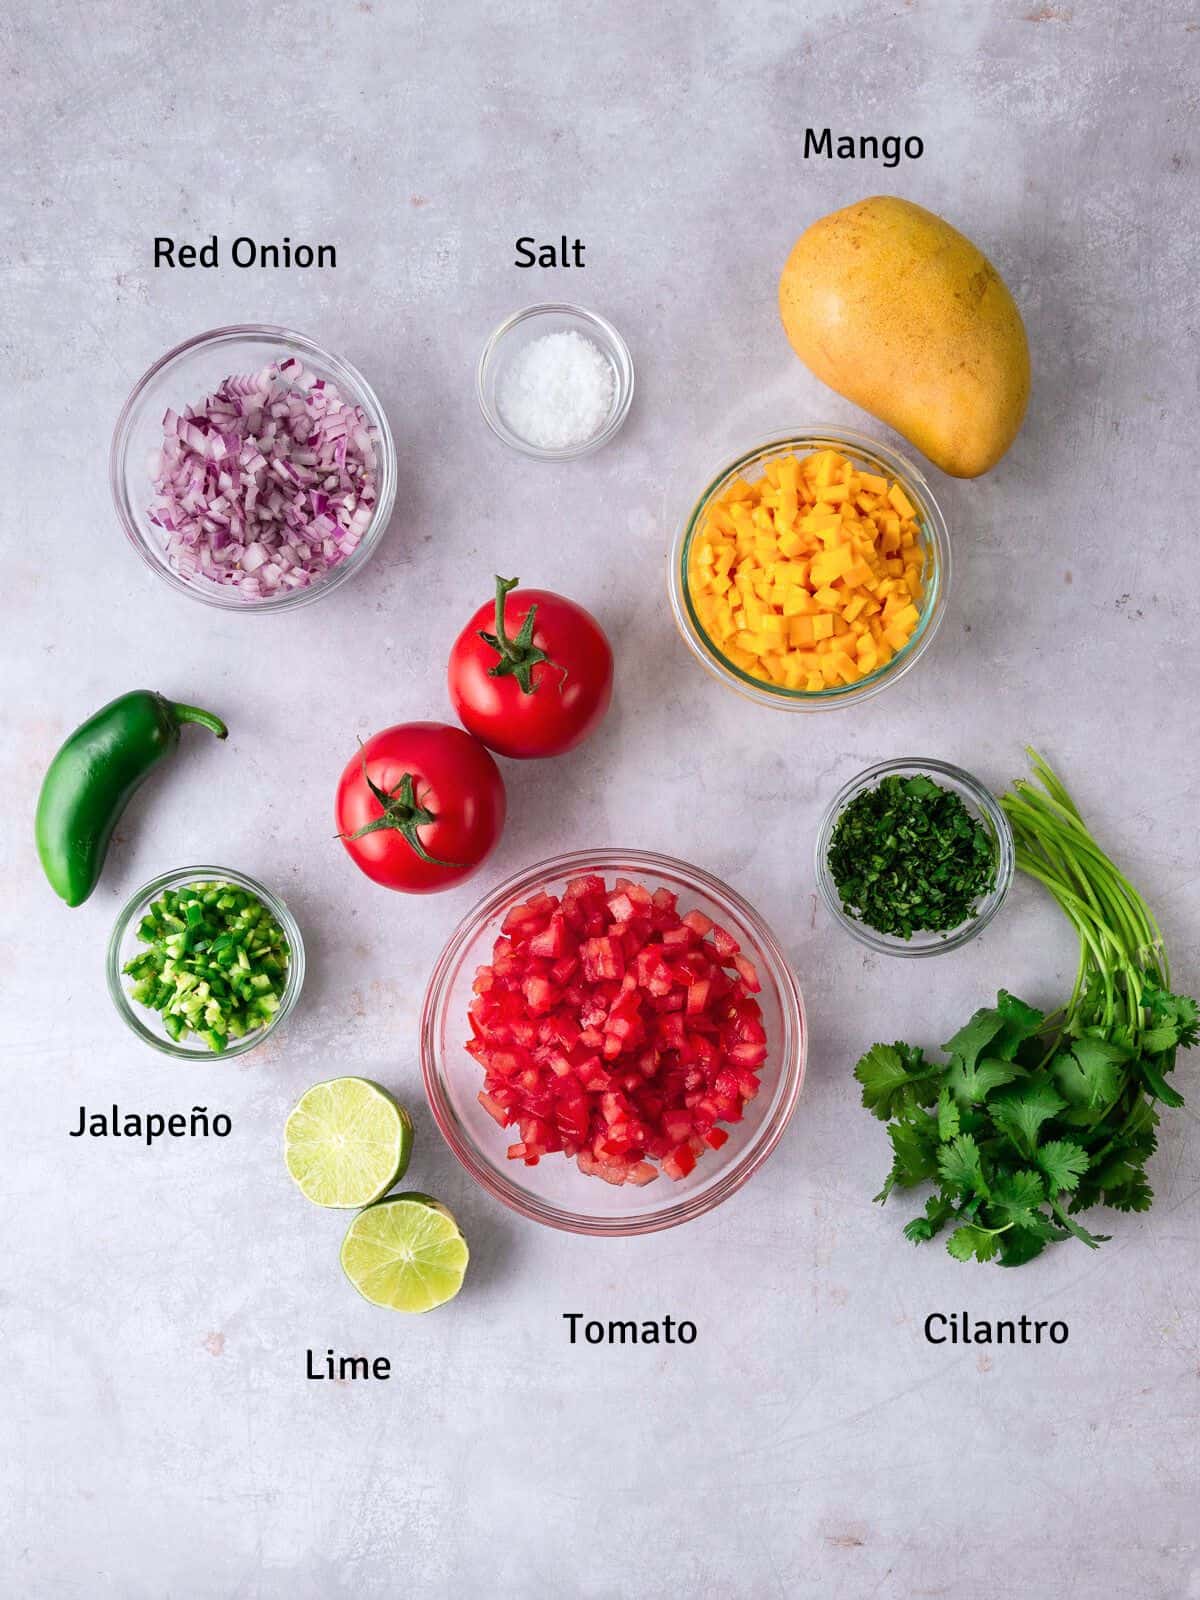 Ingredients for mango pico de gallo including red onion, tomato and jalapeño.